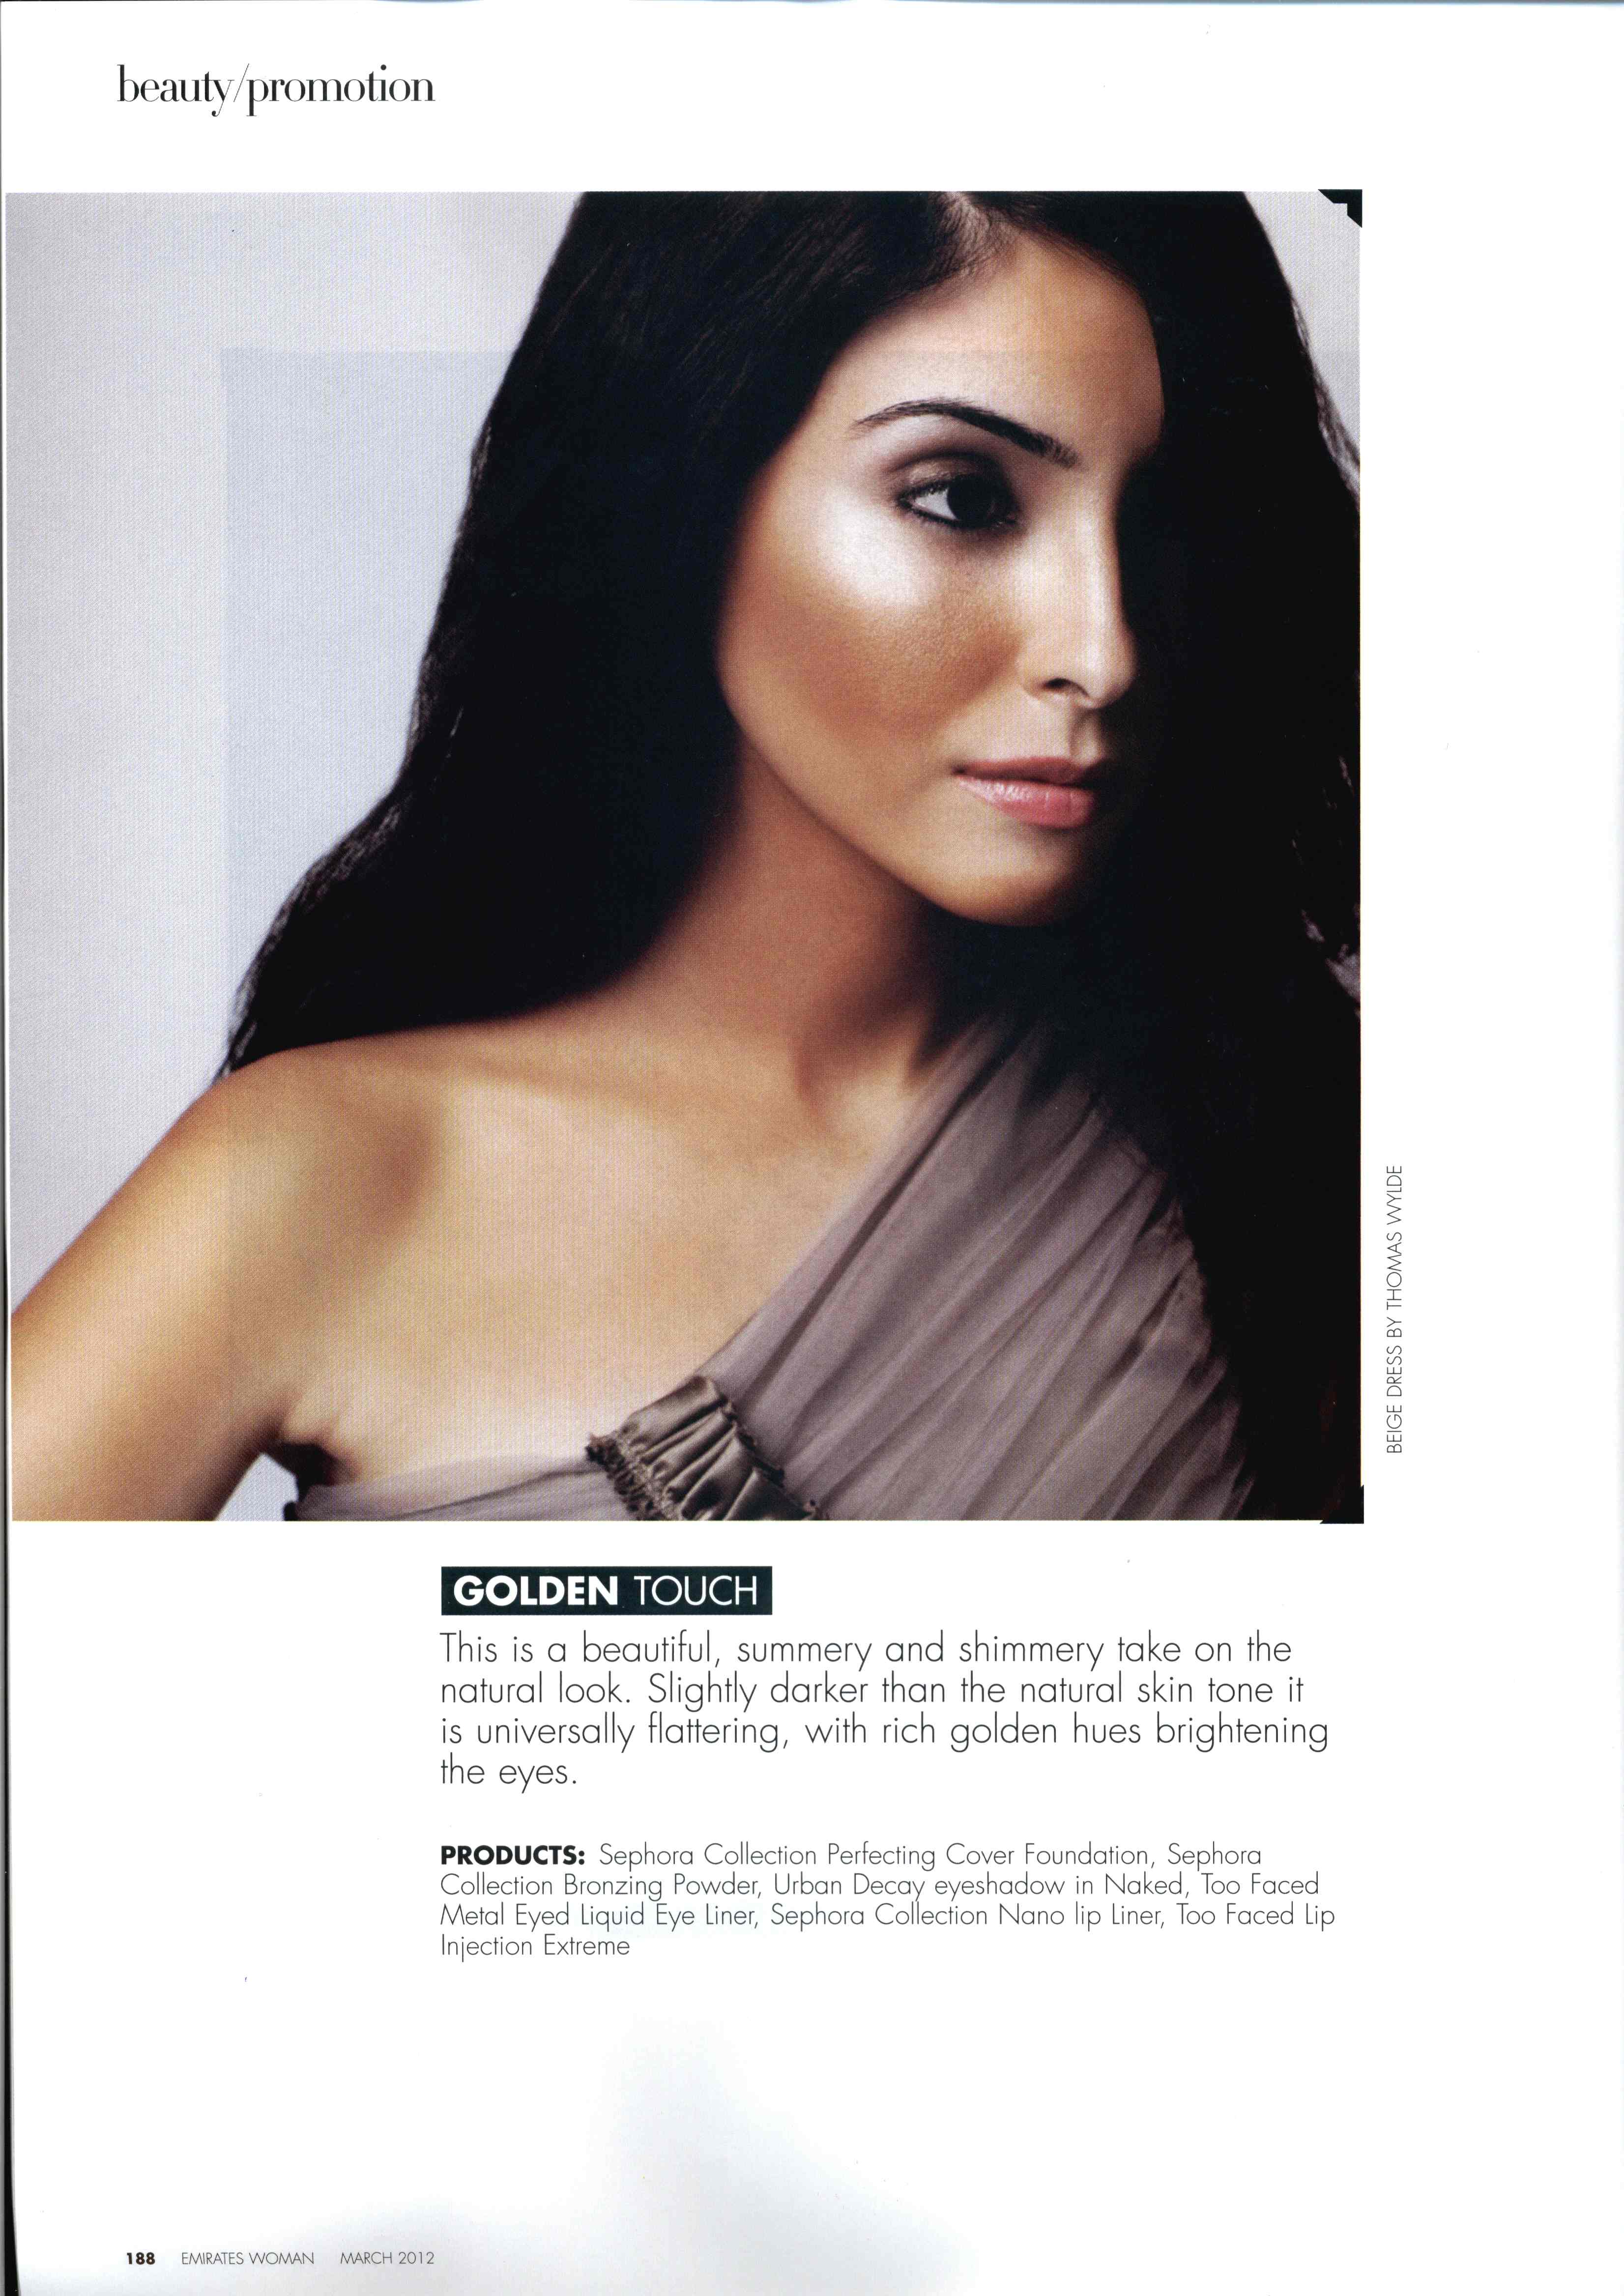 My Beauty shoot in this month's EMIRATES WOMAN magazine!